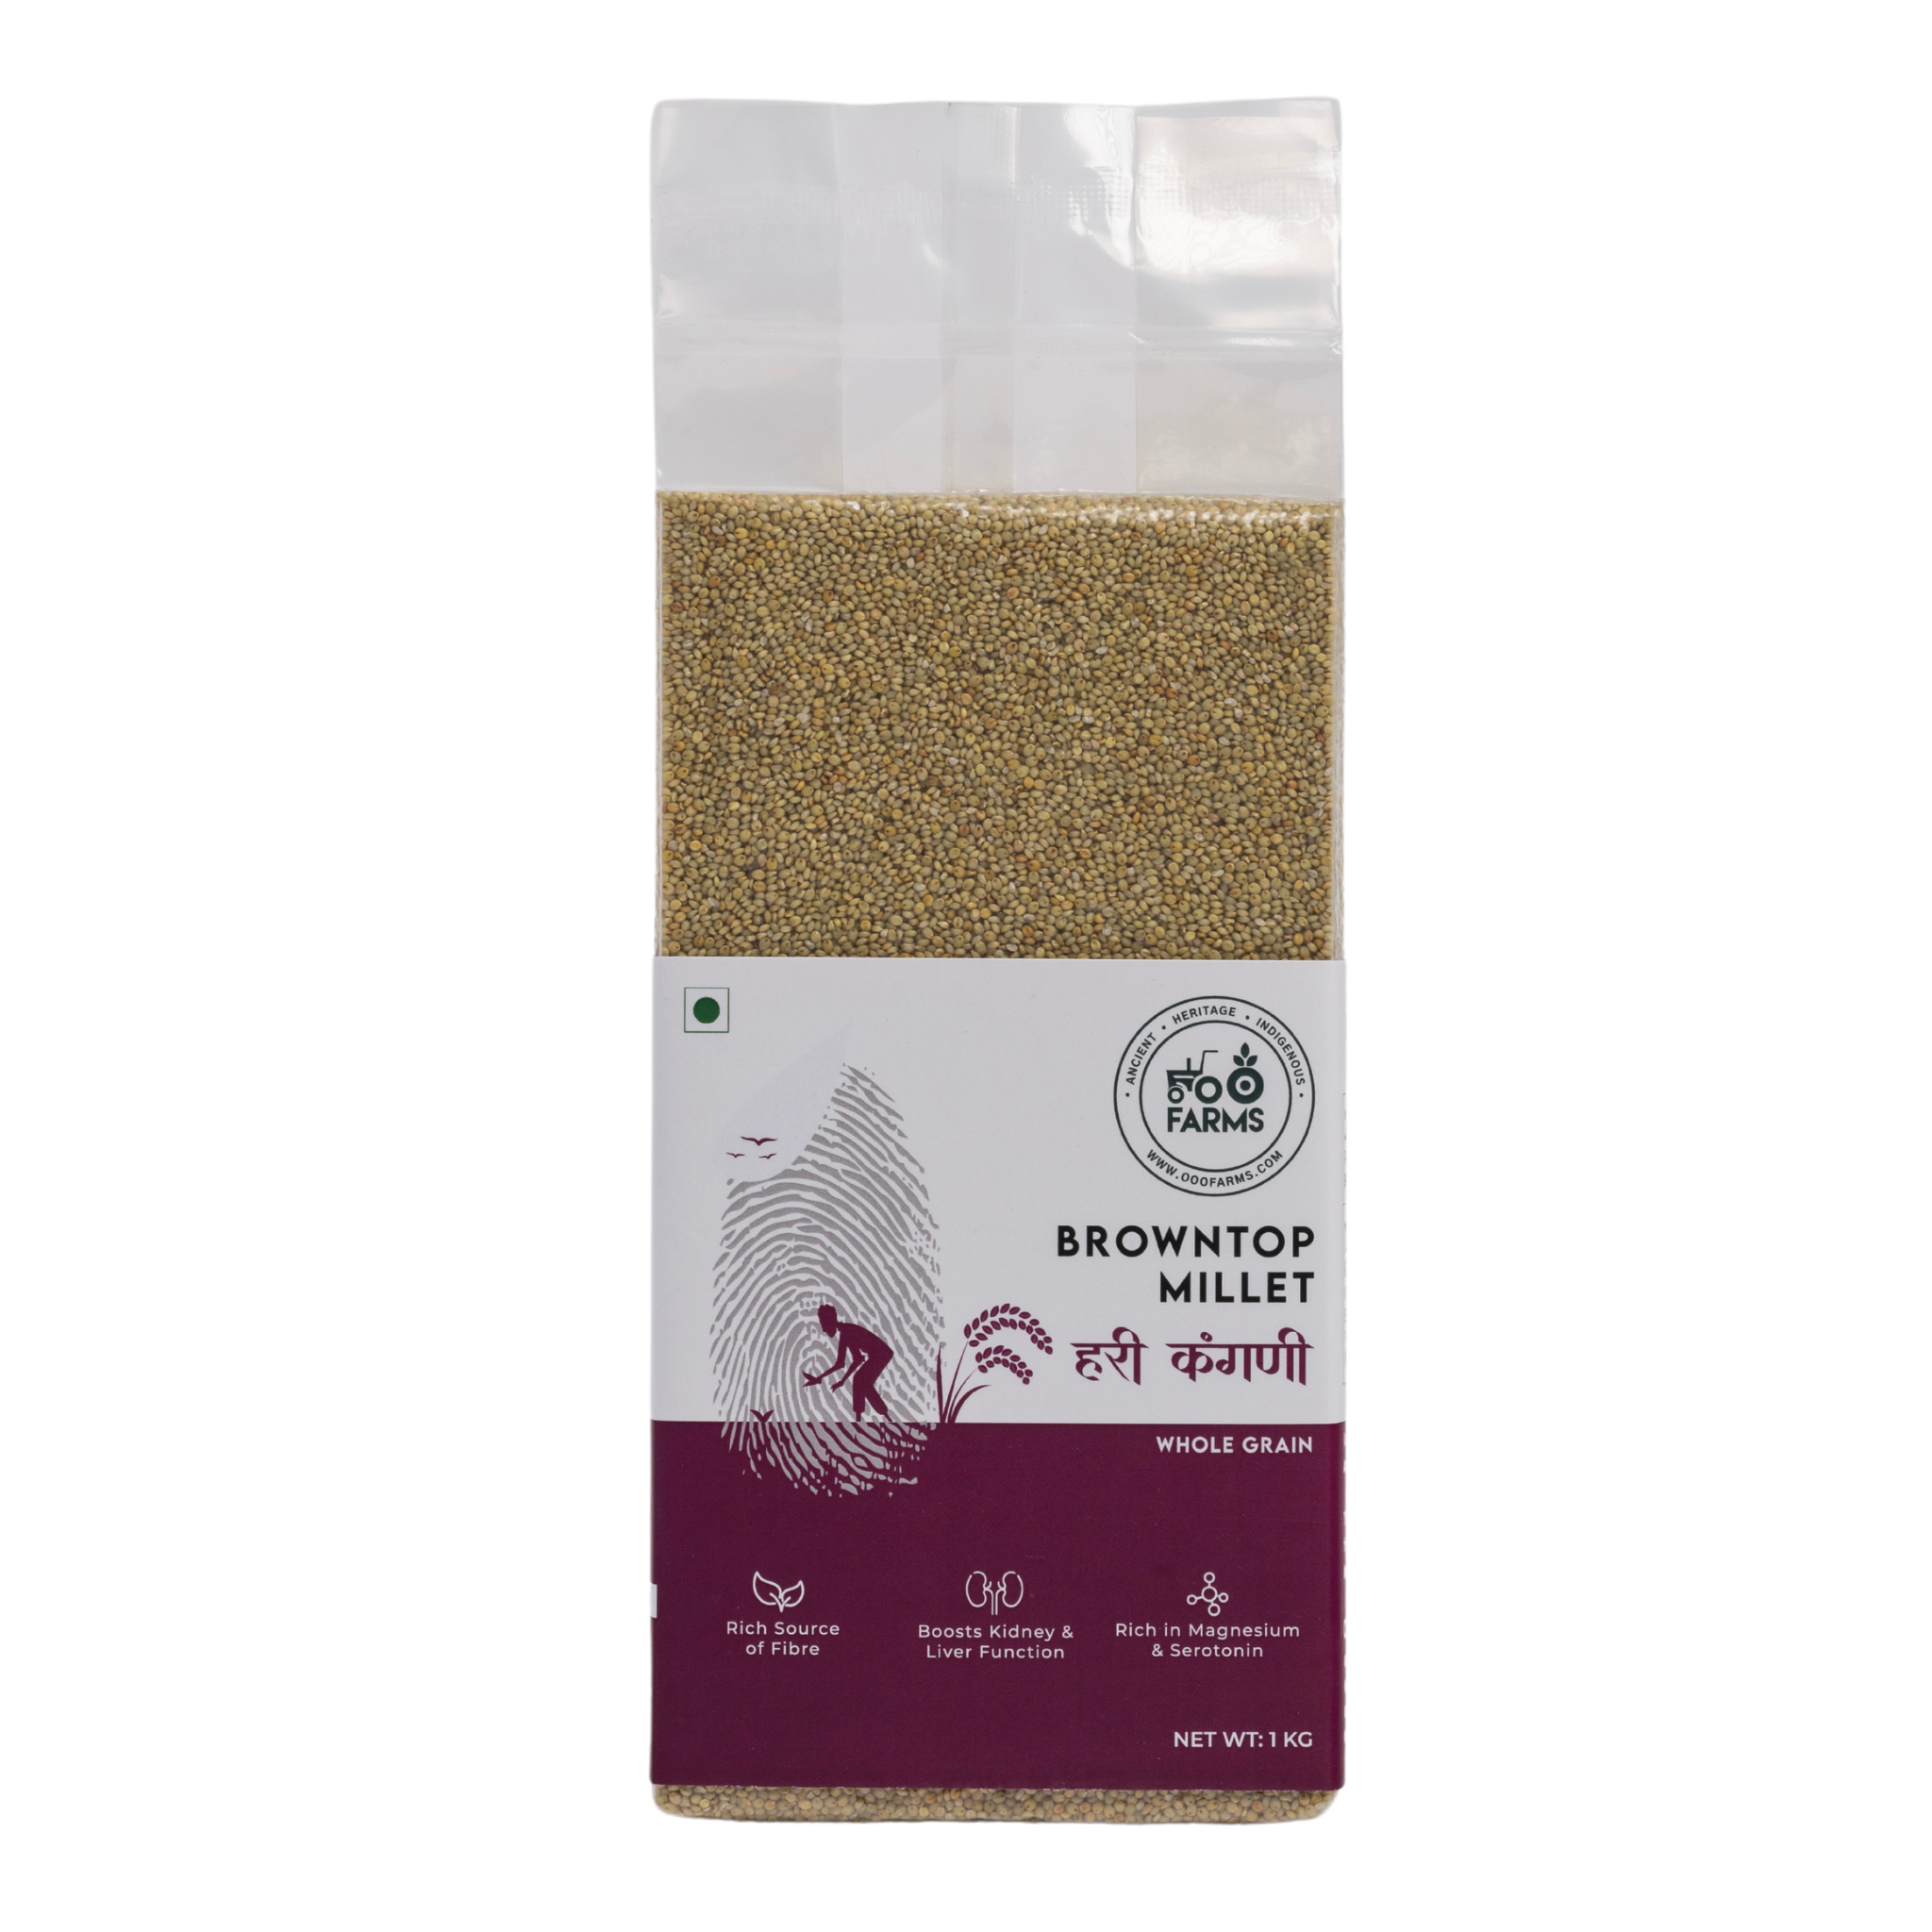 OOO Farms Whole Browntop Millet Package Frontside